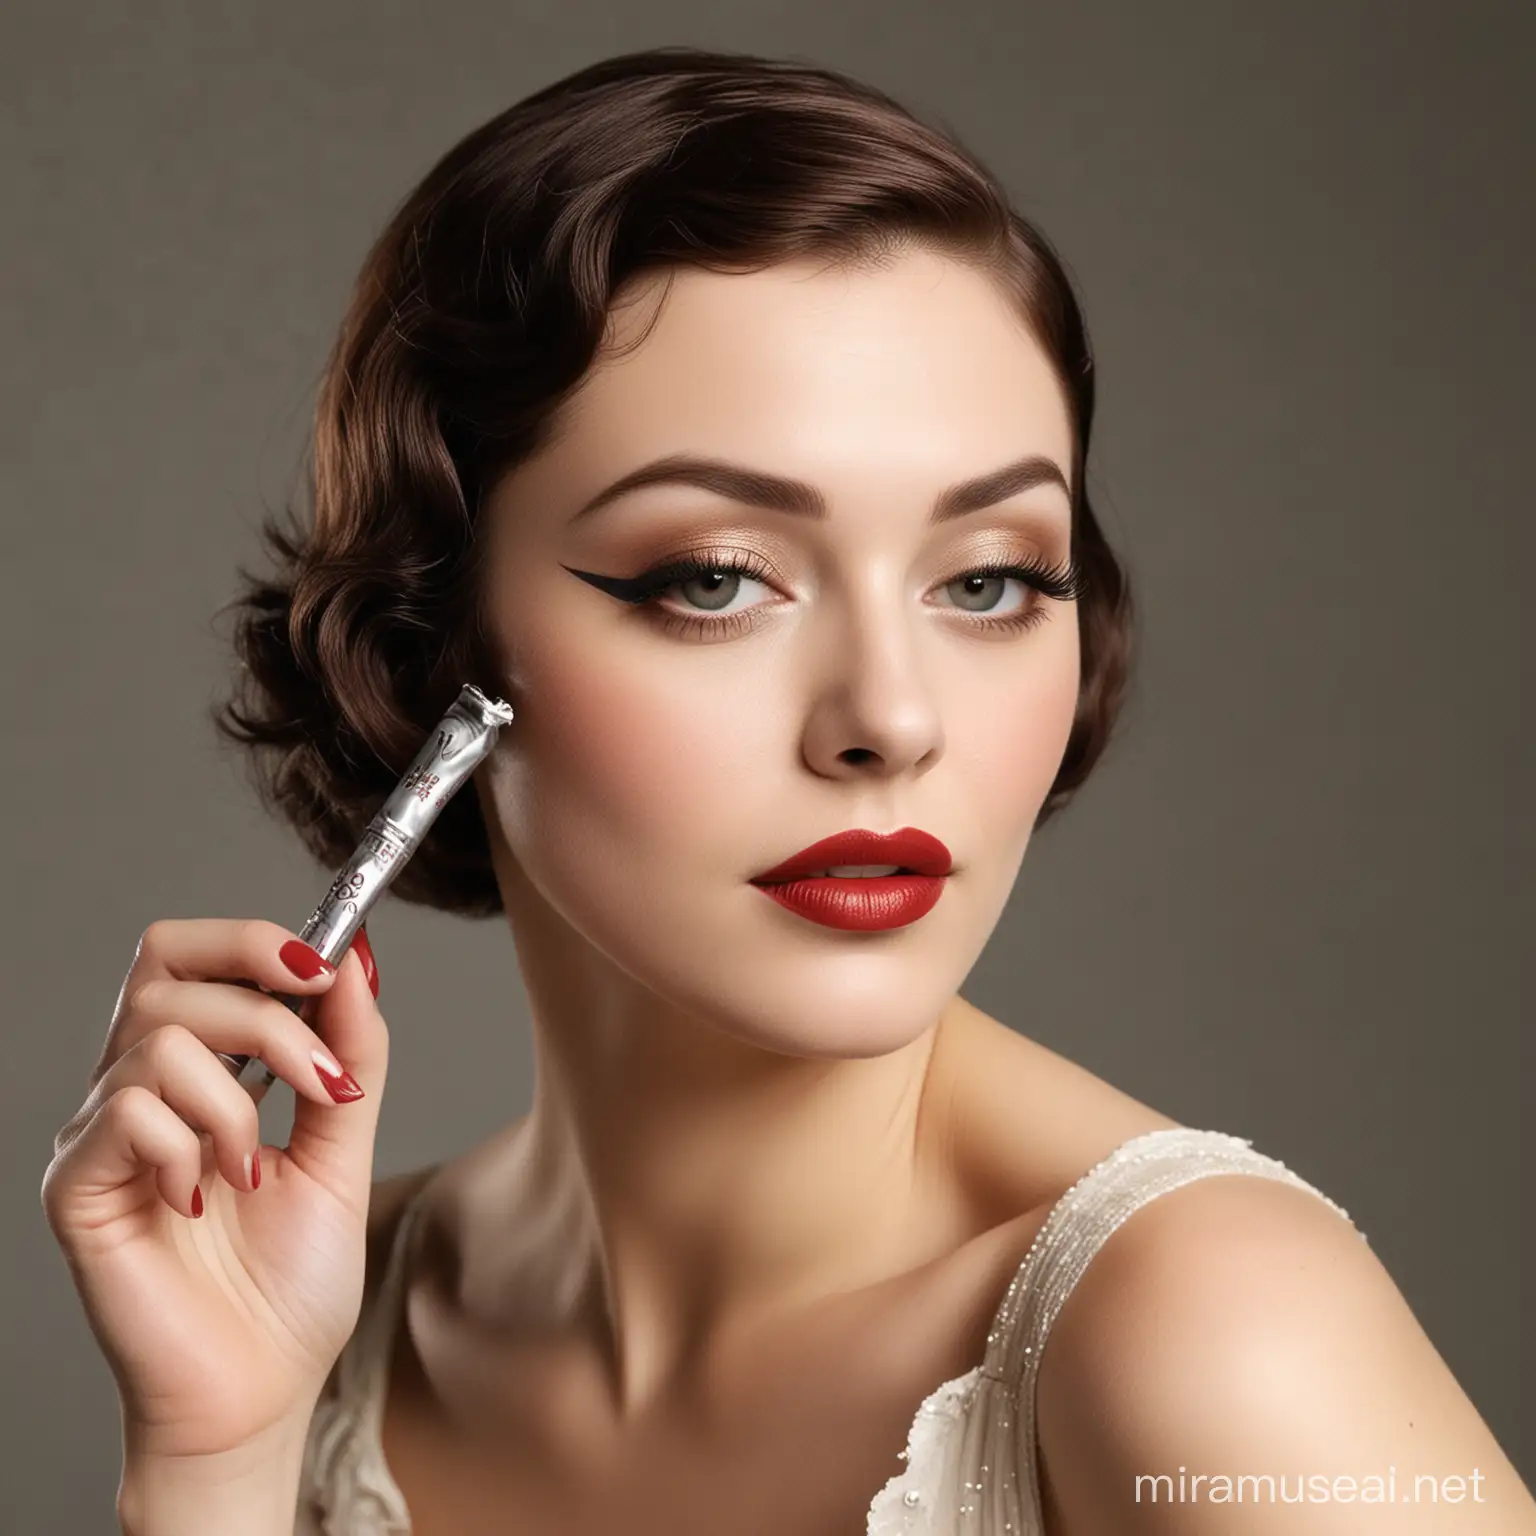 Let's start our journey in 1915 when the first lipstick tube was invented. Prior to this, lipsticks were sold in paper tubes, silk papers, or small pots. Dark red became the dominant lipstick color during the roaring '20s, coinciding with the rise of the Cupid's bow lip shape popularized by Clara Bow. With the onset of the Roaring Twenties, there was an explosion in cosmetics manufacturing and marketing in America, fueled by various factors such as the growing popularity of Hollywood movies and women gaining financial independence due to World War I. In 1923, the first eyelash curler was introduced by the Kerr Lash Company, marking a significant milestone in eye makeup history. This early version, often likened to a "bear trap," was later refined into a more user-friendly design in 1924. Fast forward to 1932, amidst the Great Depression, when the Revson brothers and chemist Charles Lachman revolutionized nail polish production by using pigments instead of dyes, laying the foundation for the Revlon empire. The introduction of Technicolor in Hollywood films posed challenges for makeup artists, leading to the development of pancake makeup by Max Factor in 1938, offering a matte finish ideal for color film. The 1950s witnessed the birth of modern-day mascara, with Helena Rubinstein and Maybelline launching their versions. In 1960, plastic compacts replaced traditional powder cases, reflecting changing trends in makeup packaging. The 1970s saw the advent of water-based mascara, catering to diverse skin tones, thanks to pioneering brands like Maybelline. Finally, in 1981, the Personal Care Products Council funded research into alternatives to animal testing, marking a milestone in ethical cosmetics. 